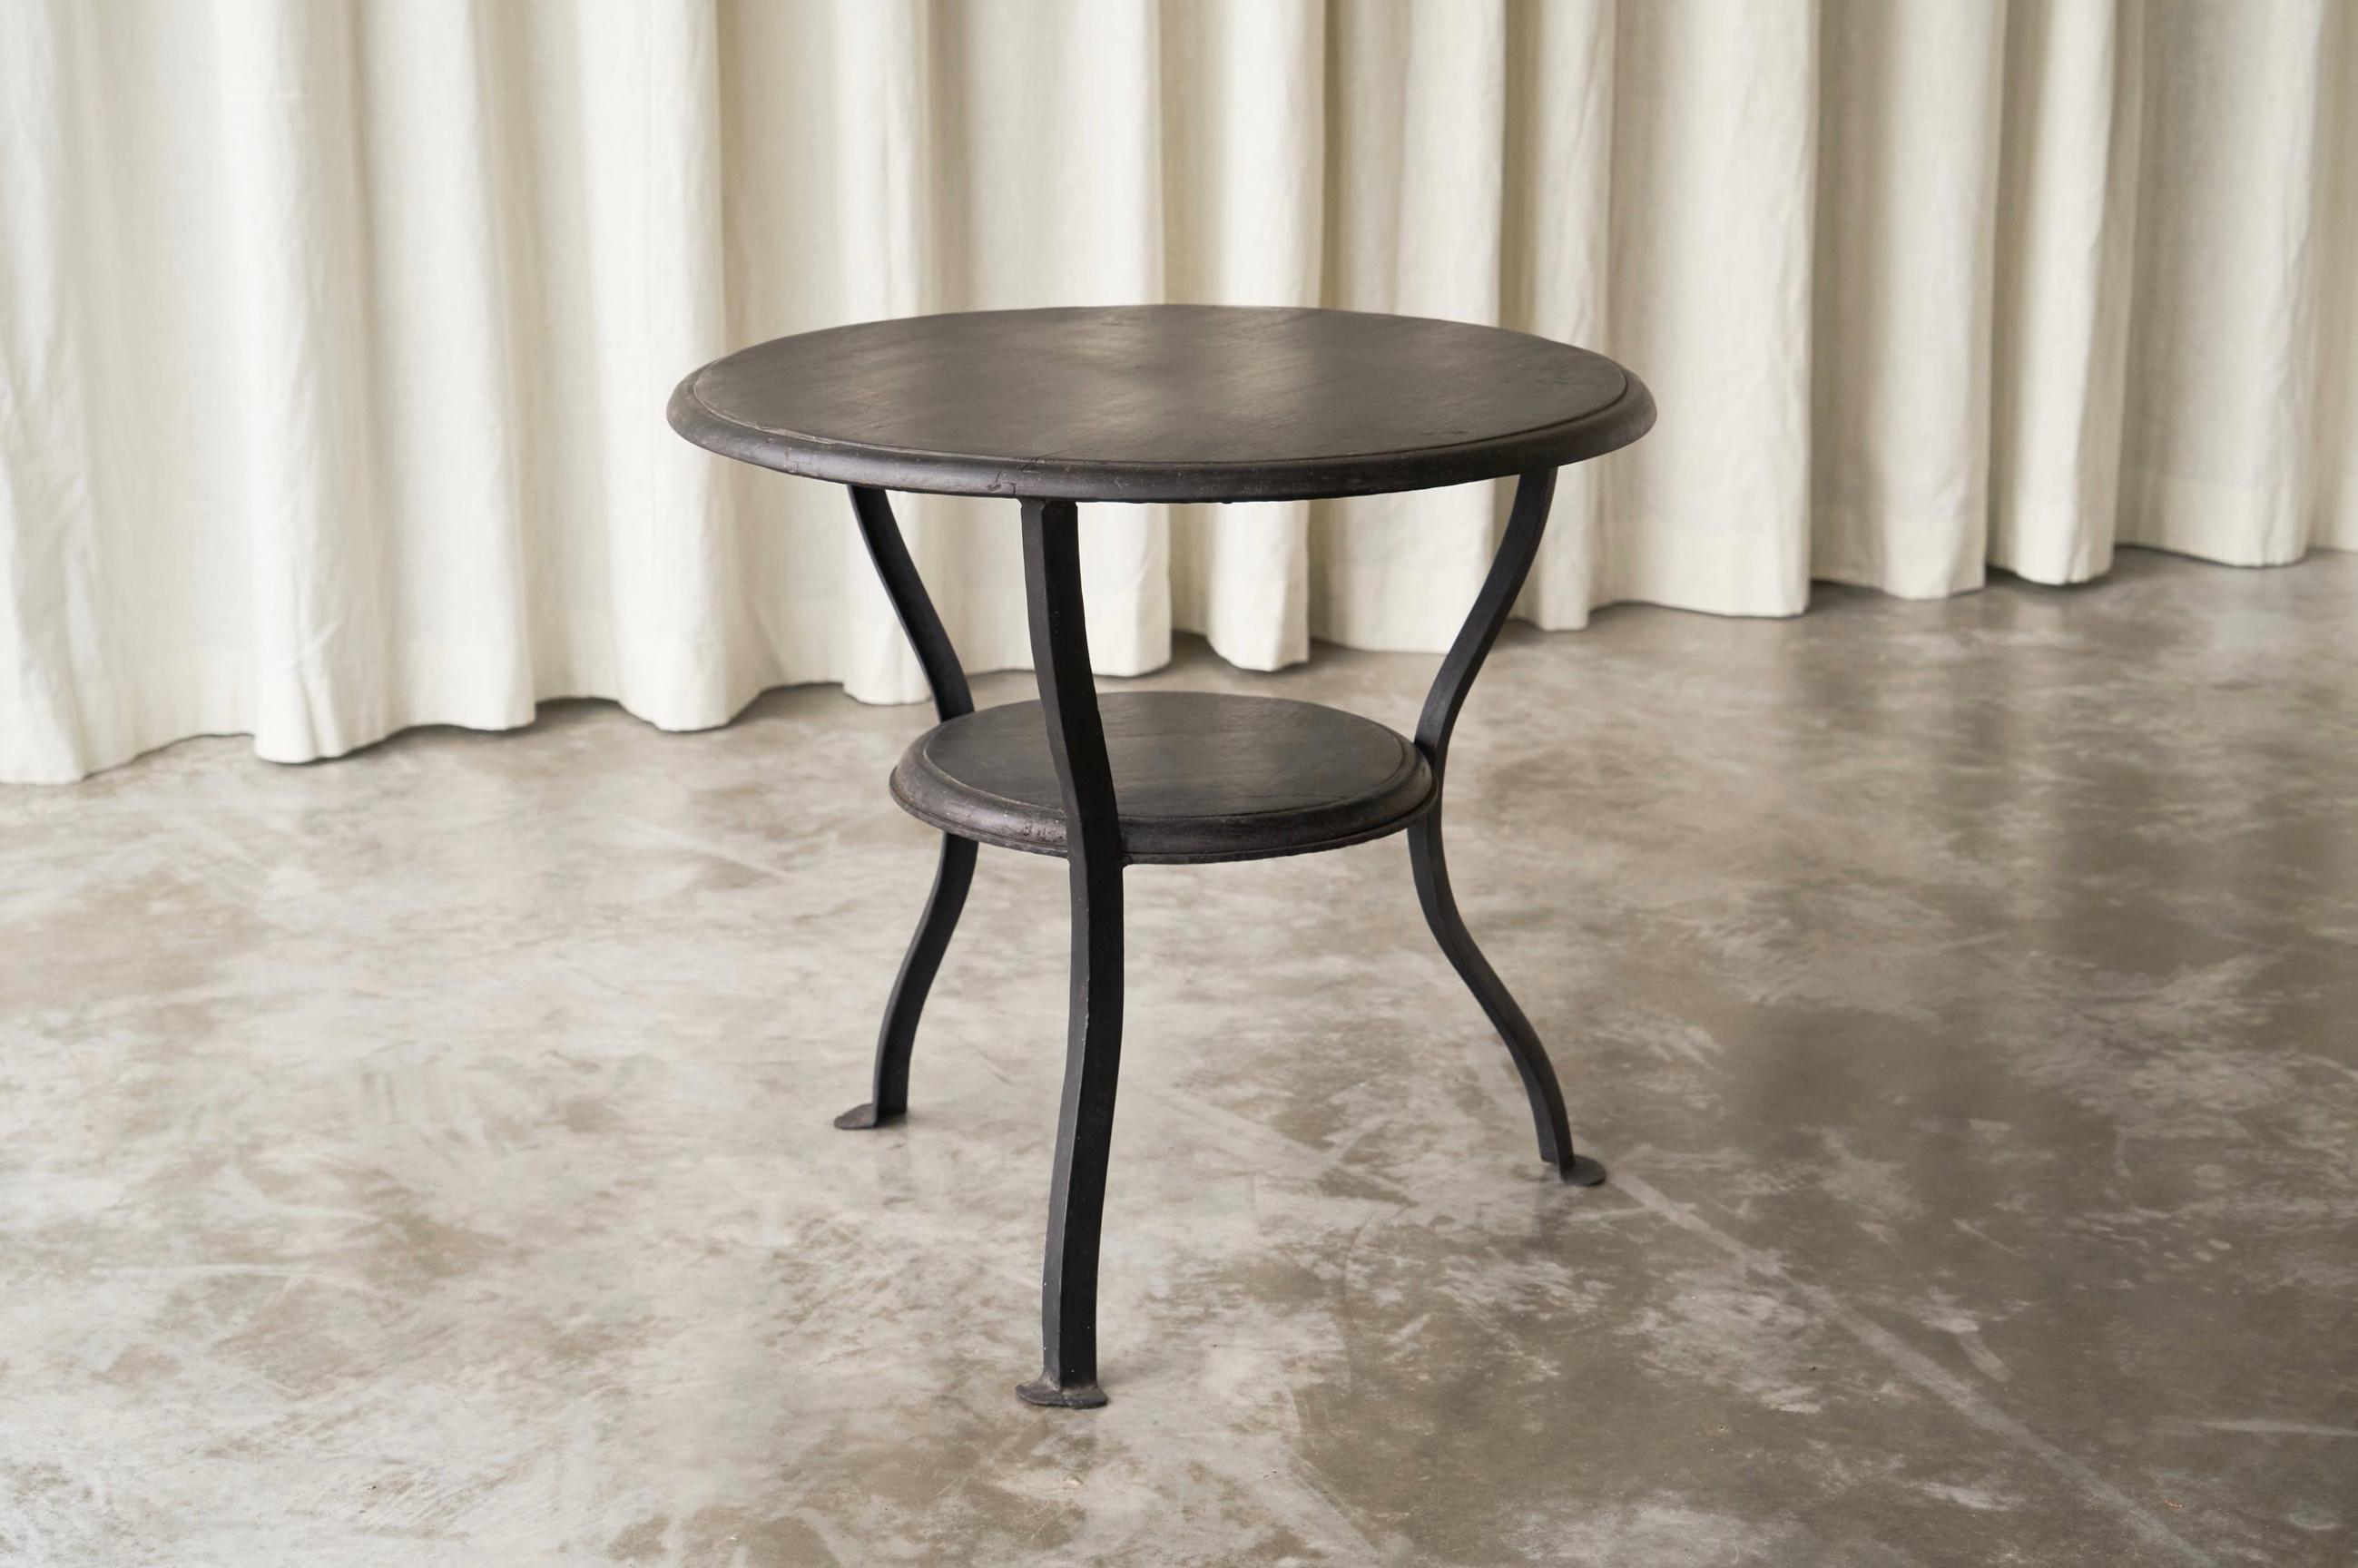 Wabi Sabi Side Table in Hand Forged Metal and Stained Wood, 1920s.

This wonderful 1920s Wabi Sabi side table most likely origins from France. It is well made in hand forged and blackened steel, combined with dark stained solid wood. It features two